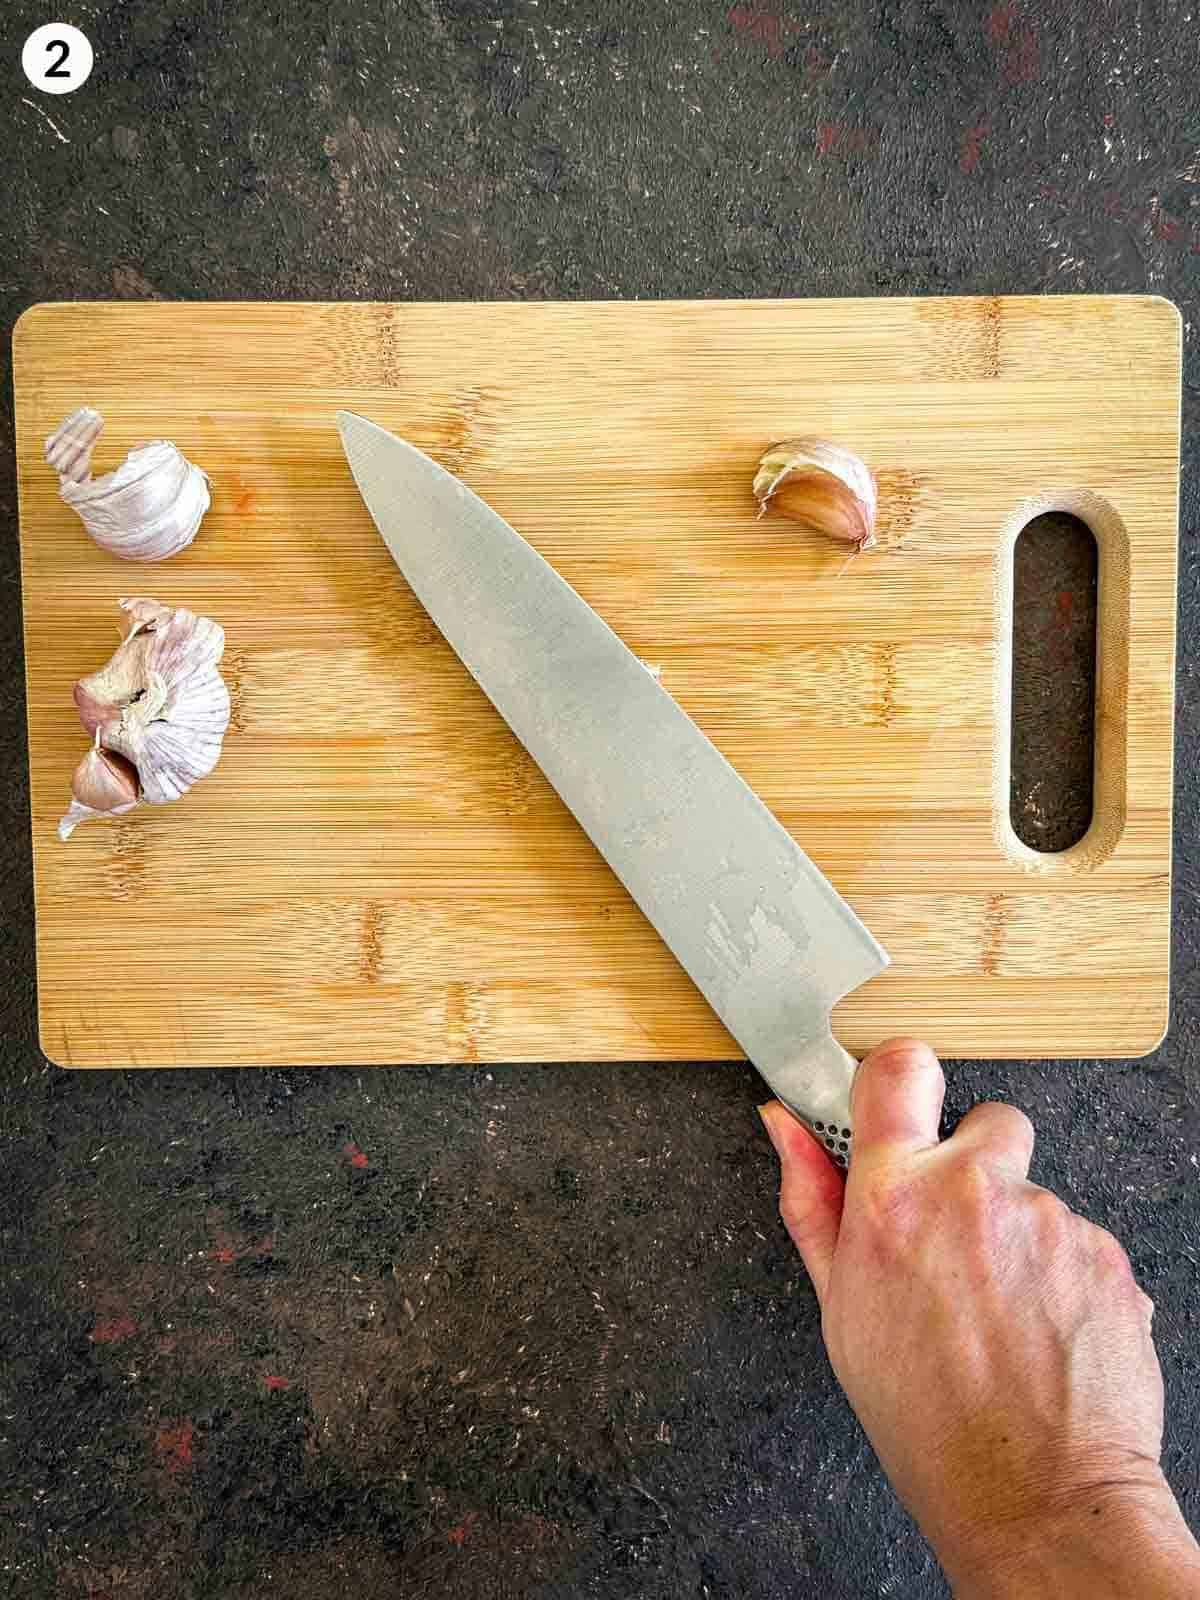 Crushing garlic cloves with a knife on a wooden chopping board